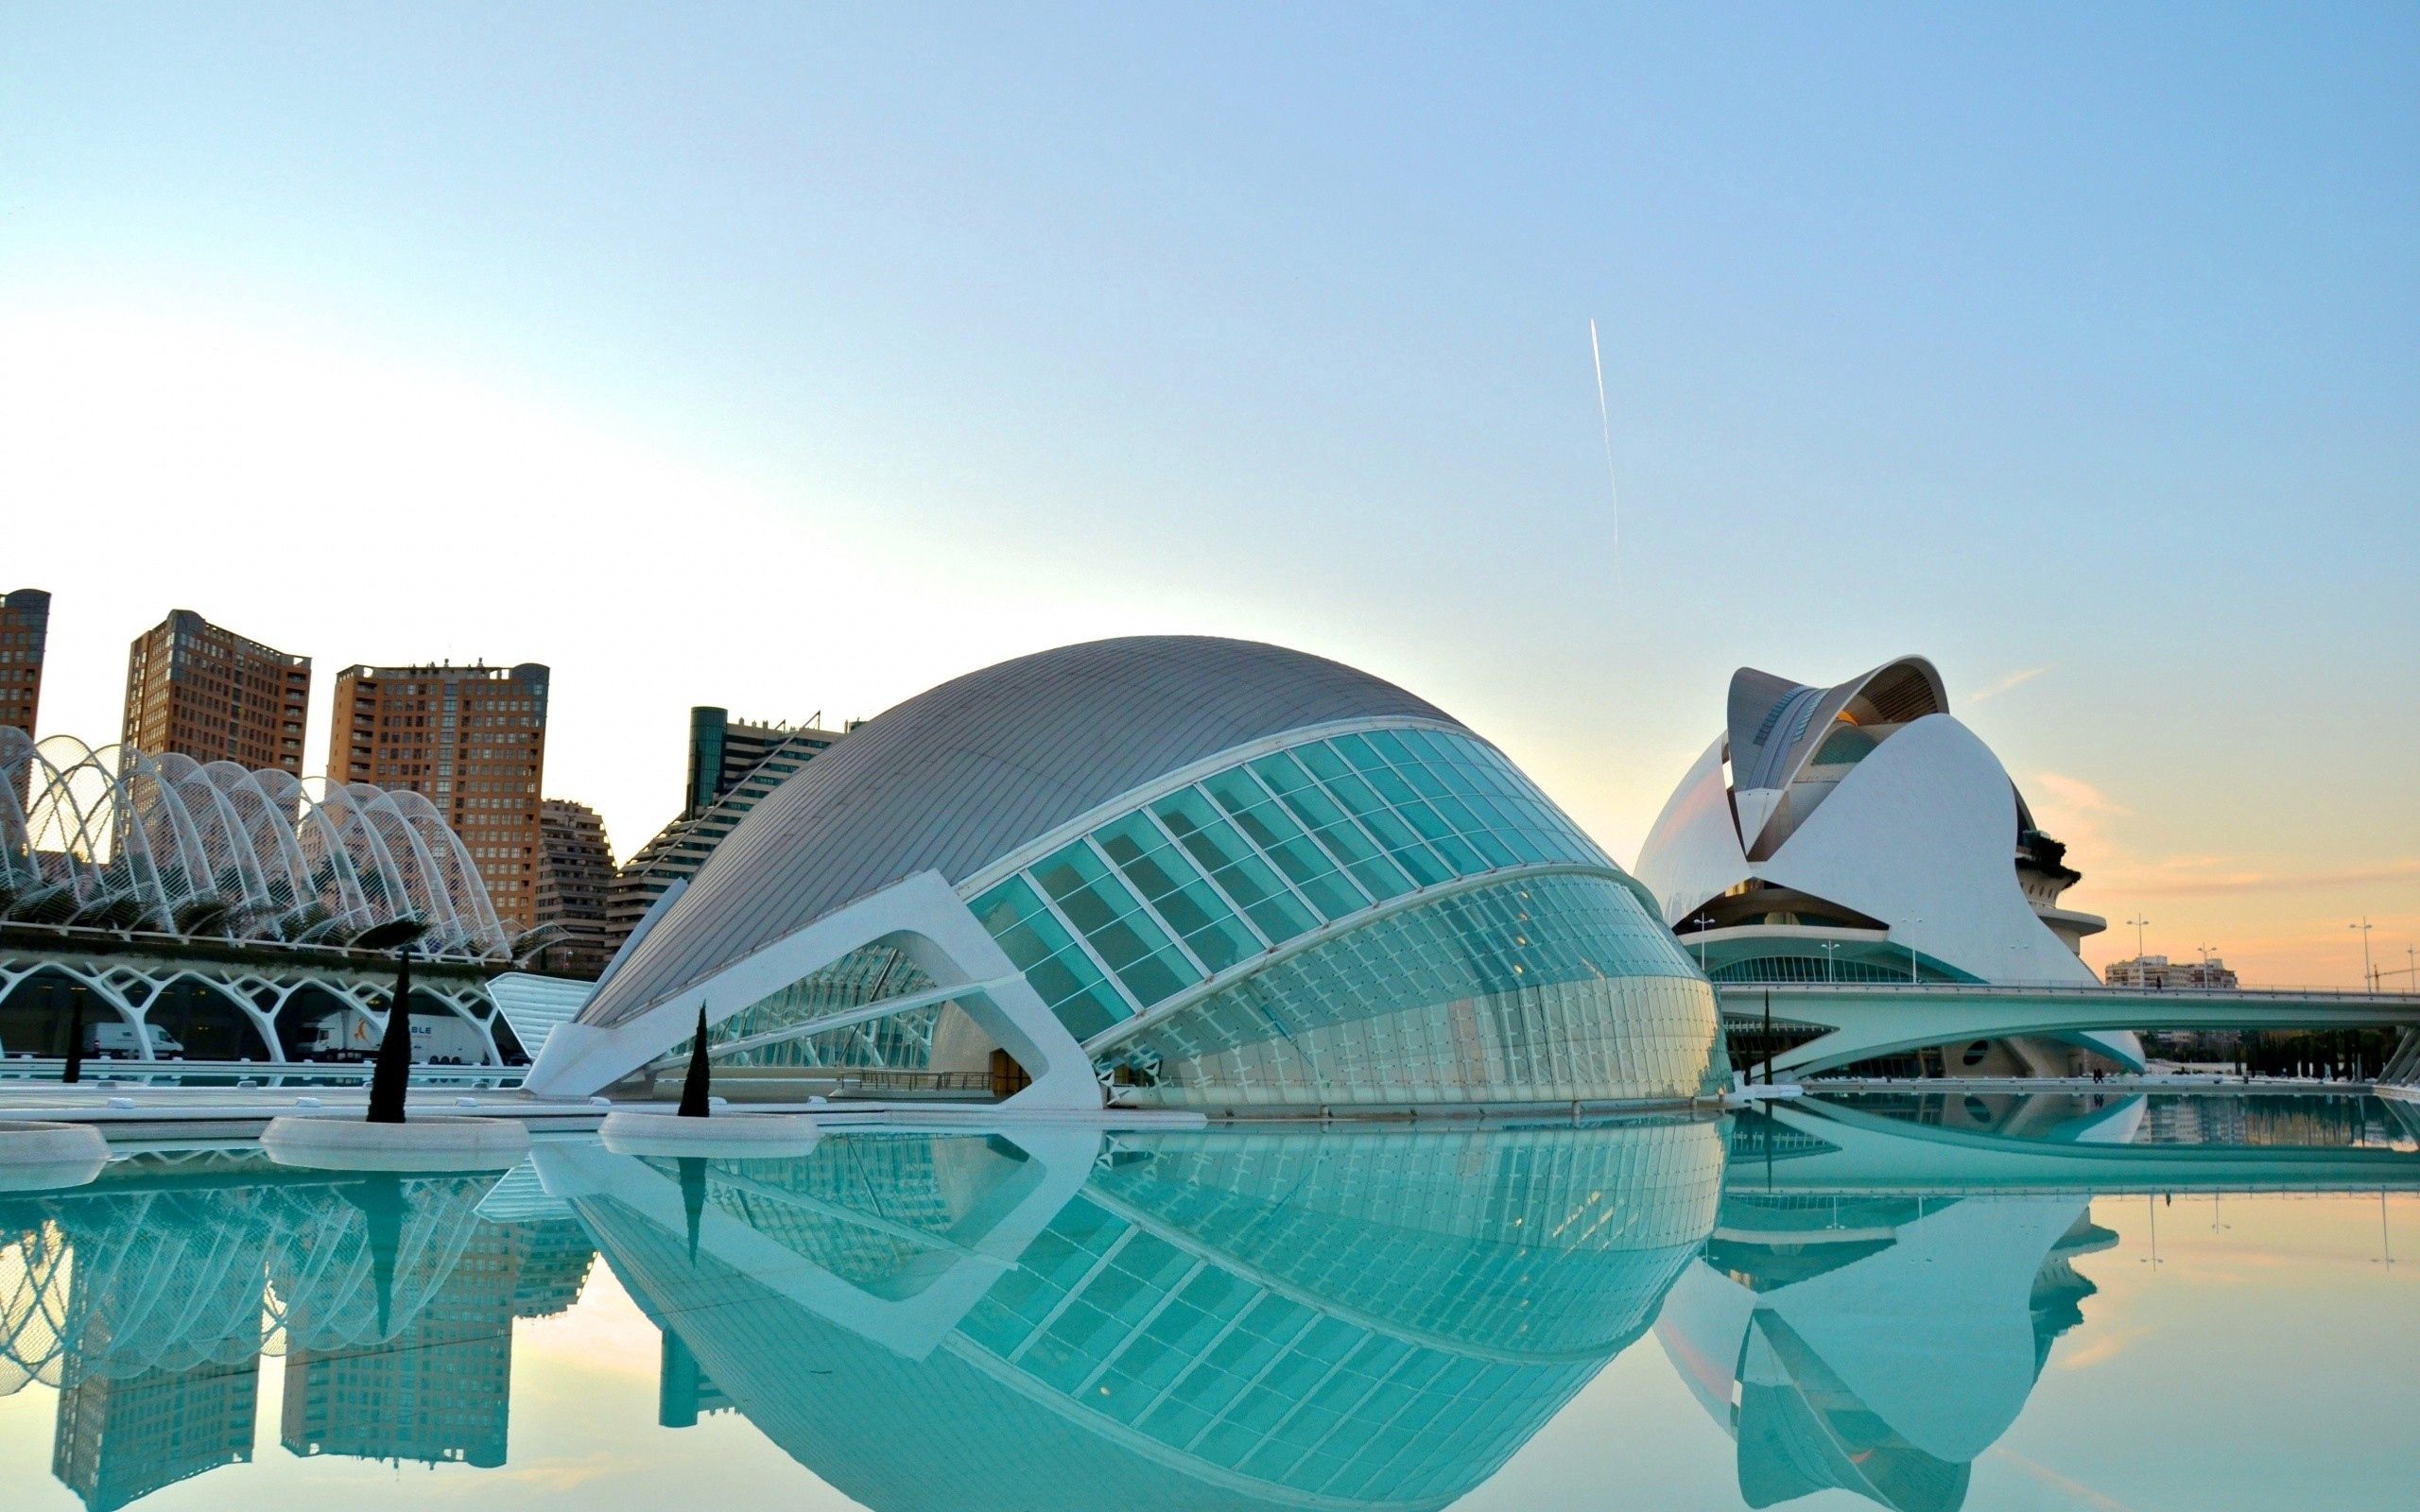 valencia, cities, architecture, building, handsomely, it's beautiful